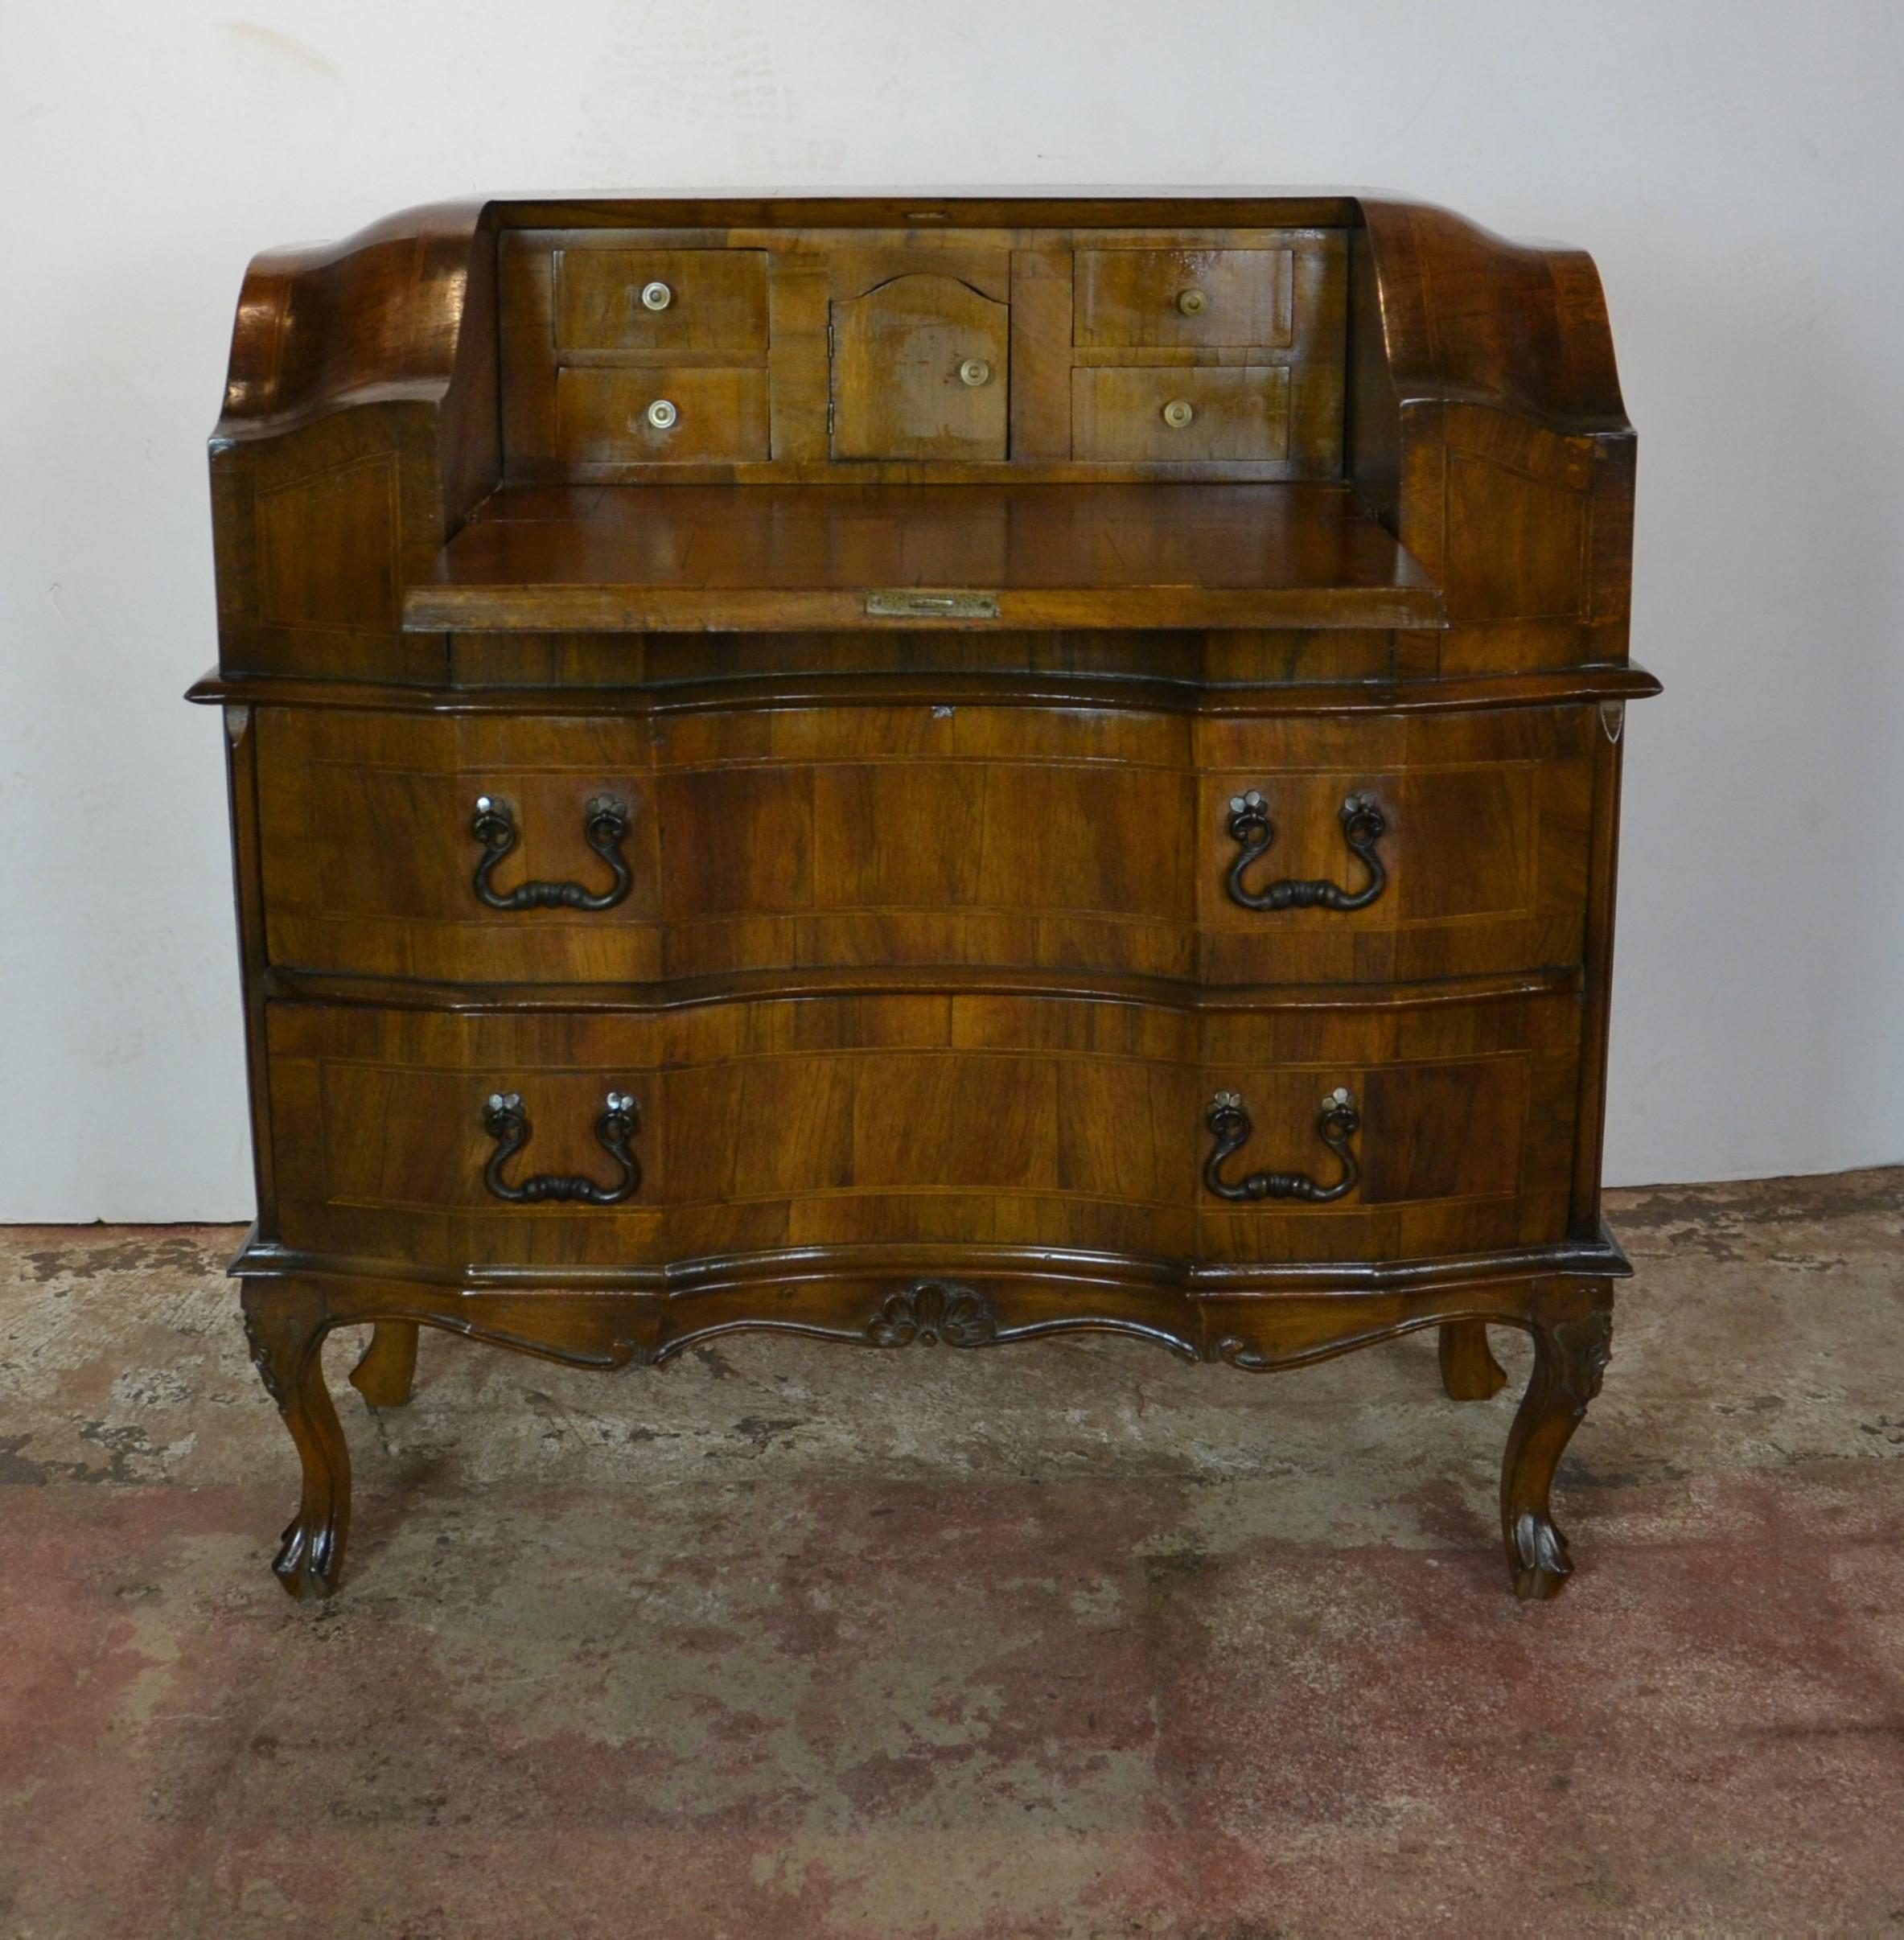 Italian tilt-top secretary. Two drawers with brass pull. The top opens up to small compartments.